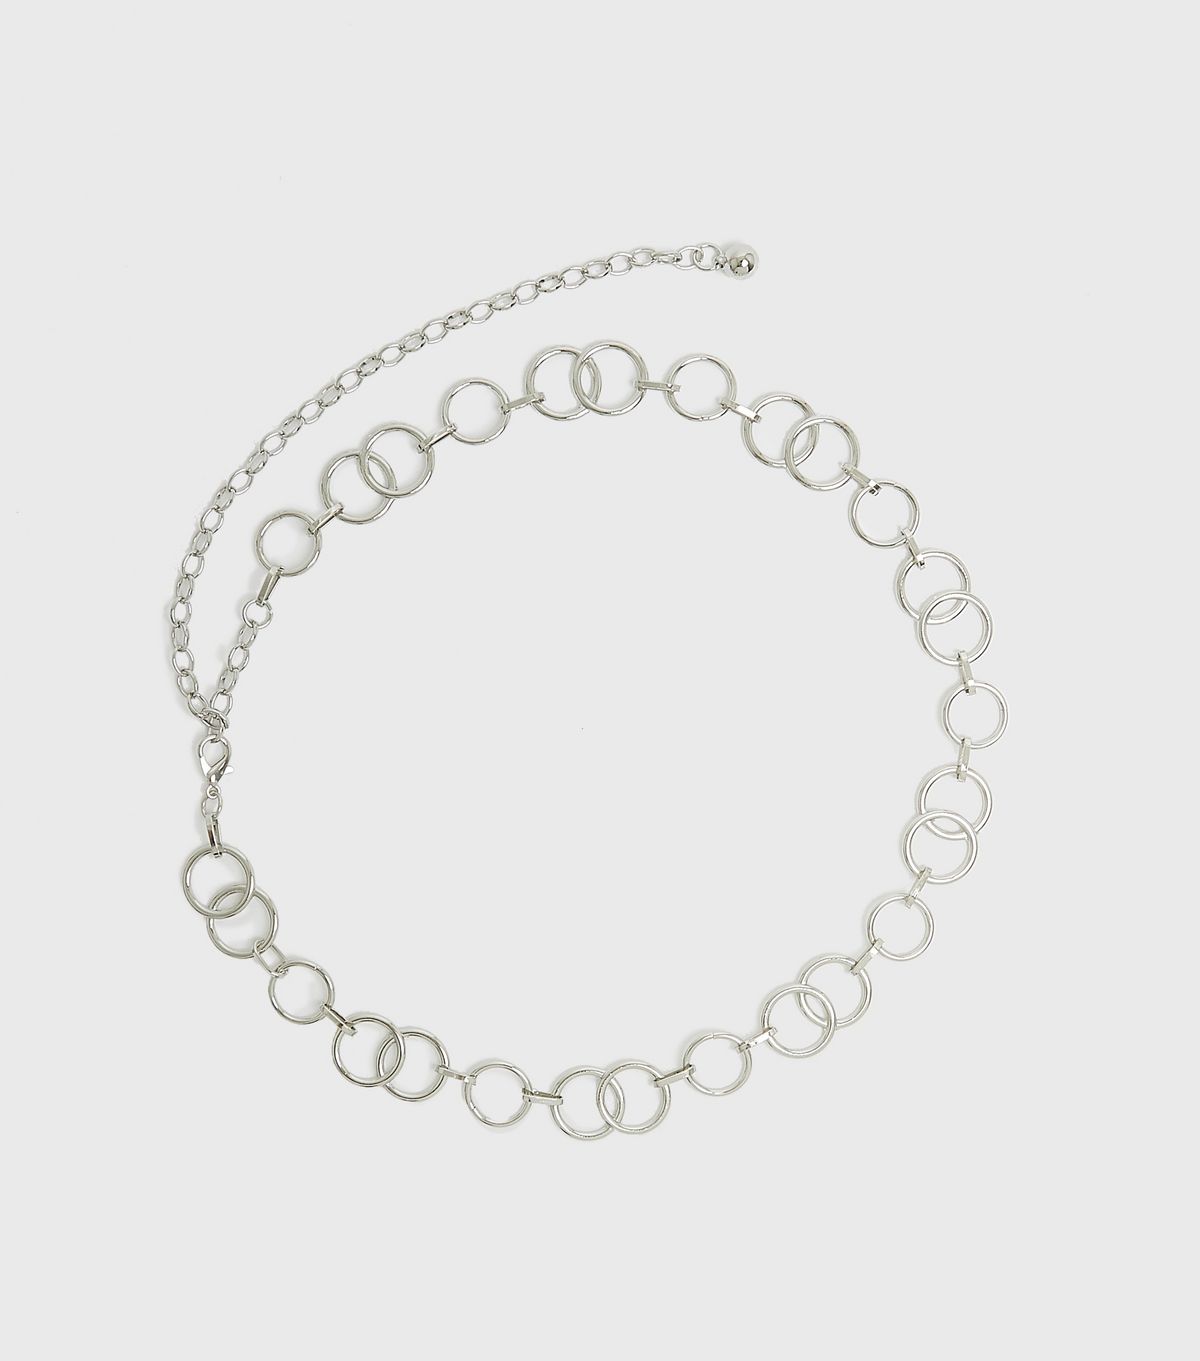 New Look Silver Circle Chain Belt, £9.99